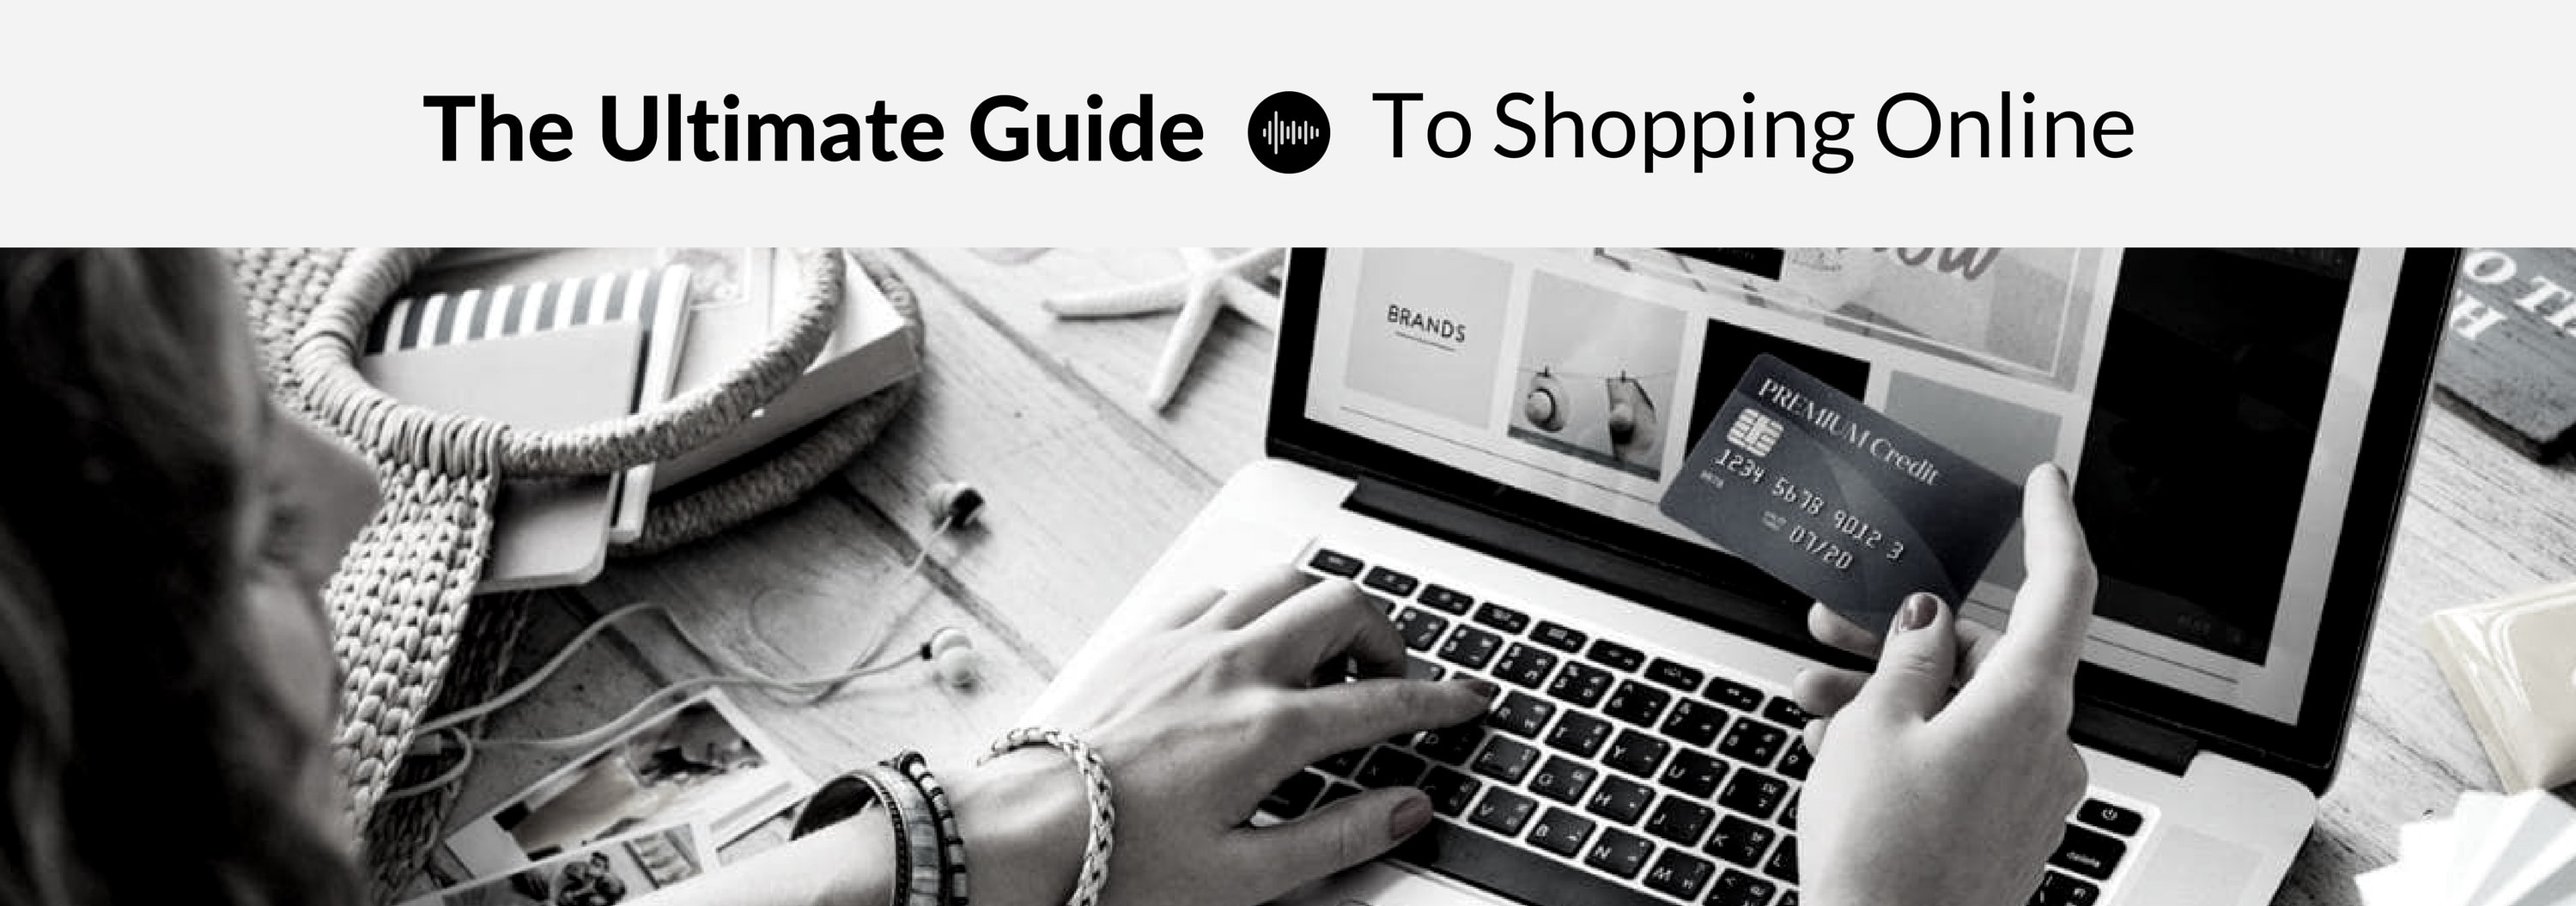 Ultimate Guide to Shopping Online